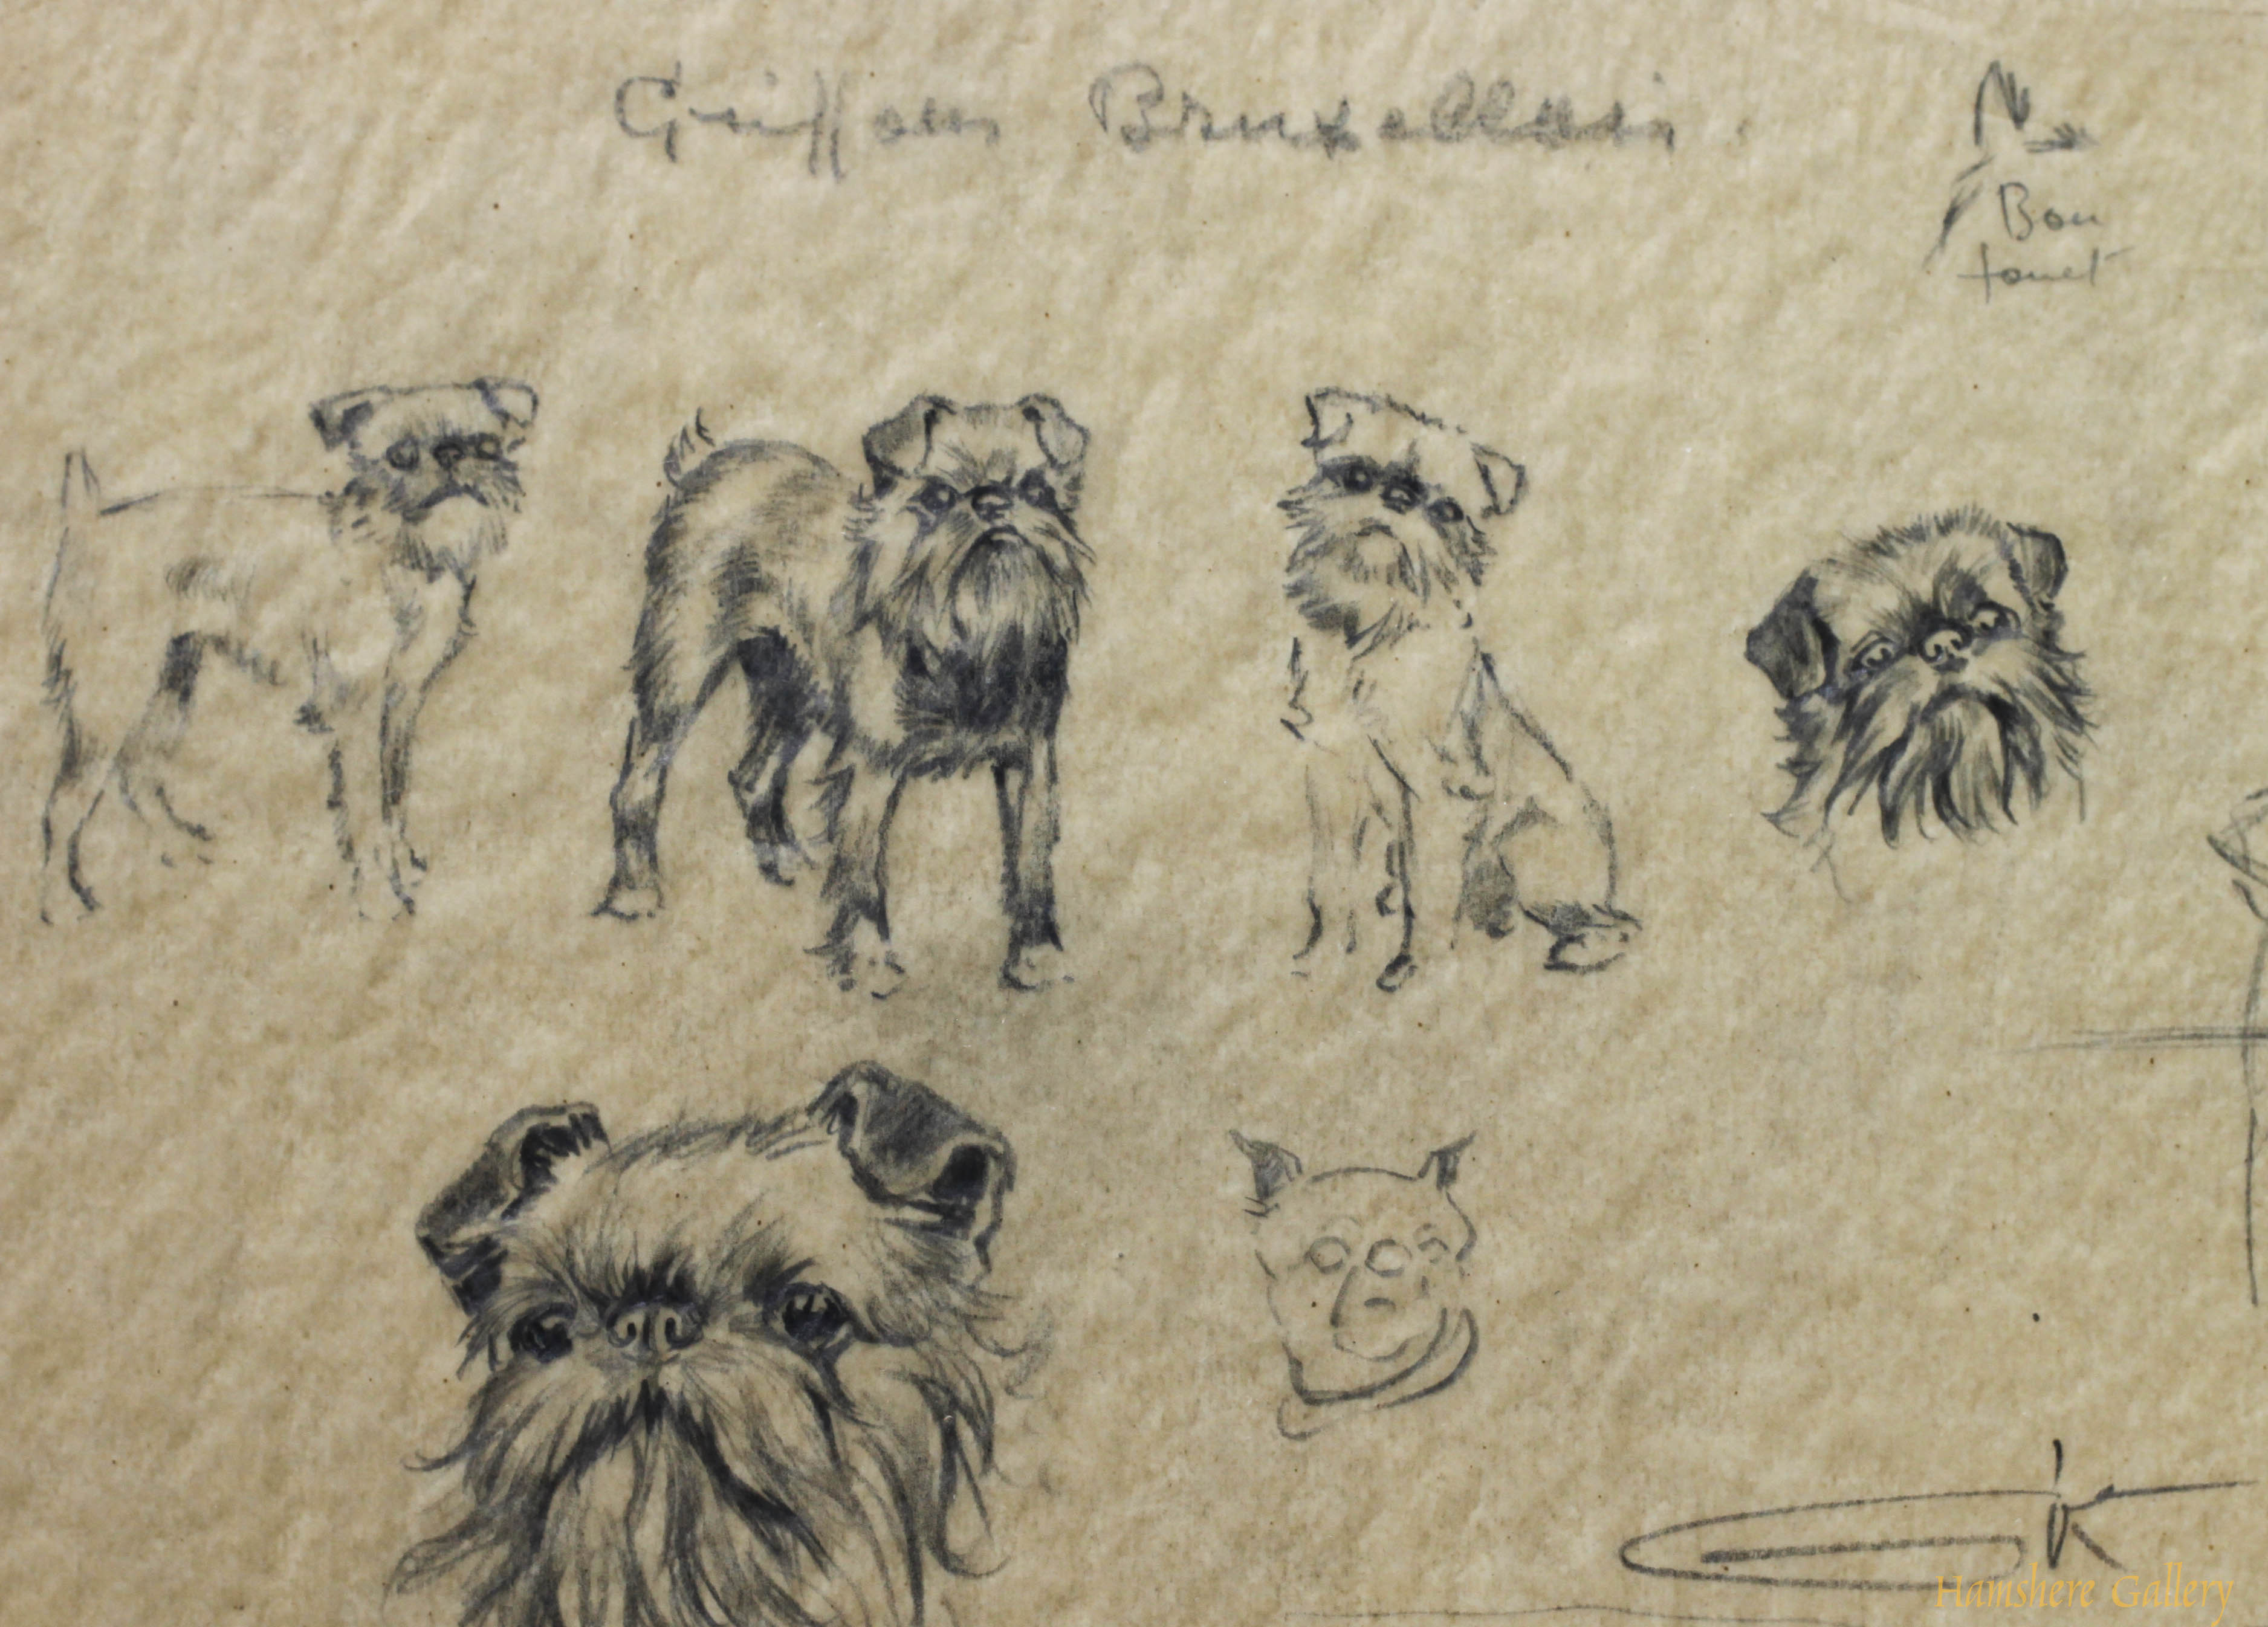 Click to see full size: Griffon Bruxellois pencil studies by Borris O�Klein / Jean Herblet- Griffon Bruxellois pencil studies by Borris O�Klein / Jean Herblet